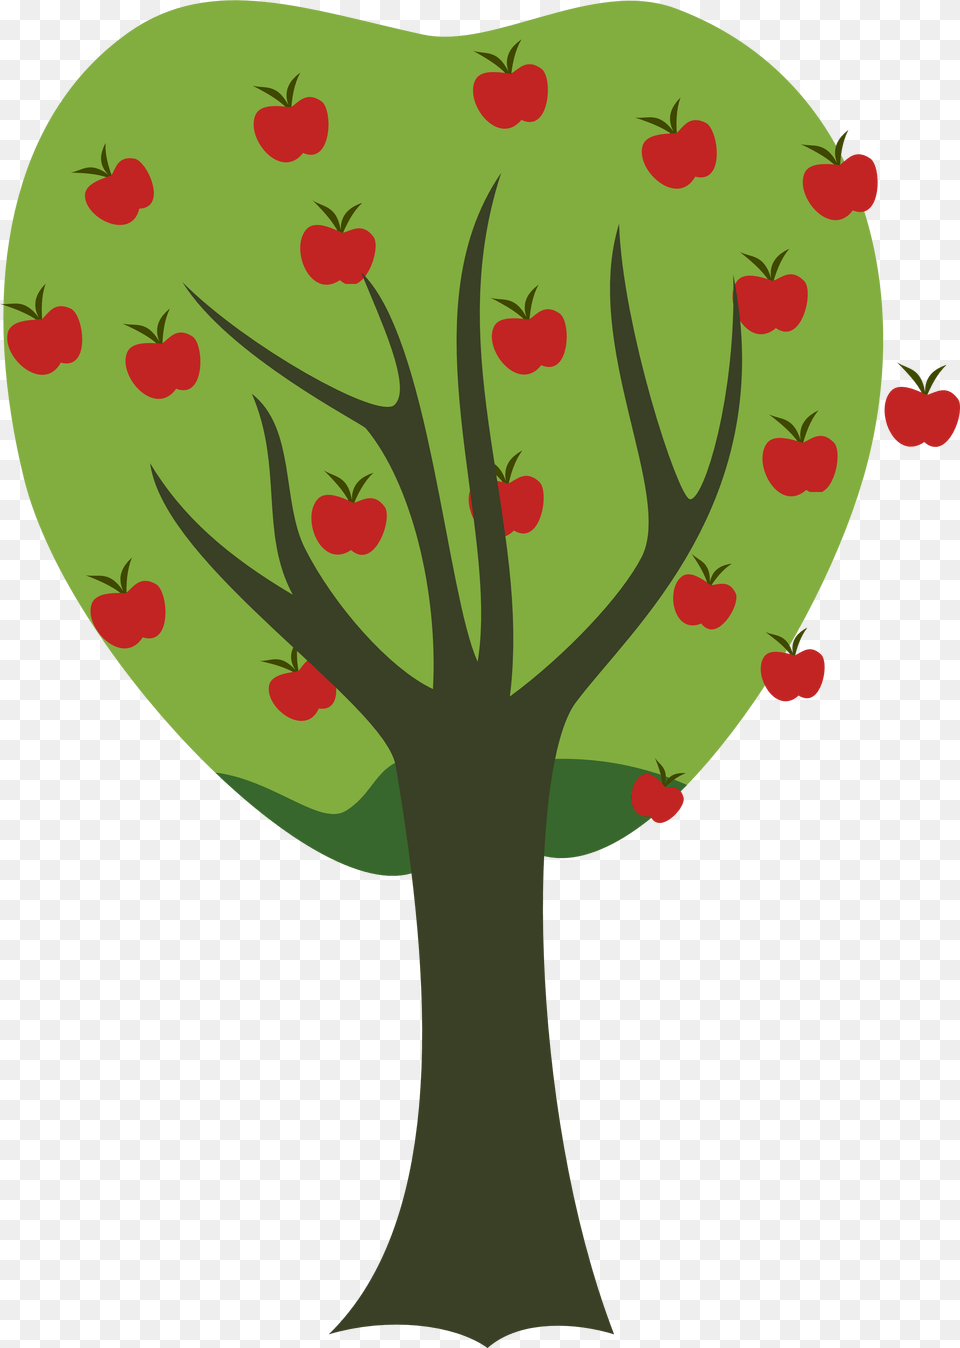 Clipart Apple Trees Black And White Apple Tree Clipart Apple Tree Clipart Background, Leaf, Plant, Animal, Deer Free Transparent Png